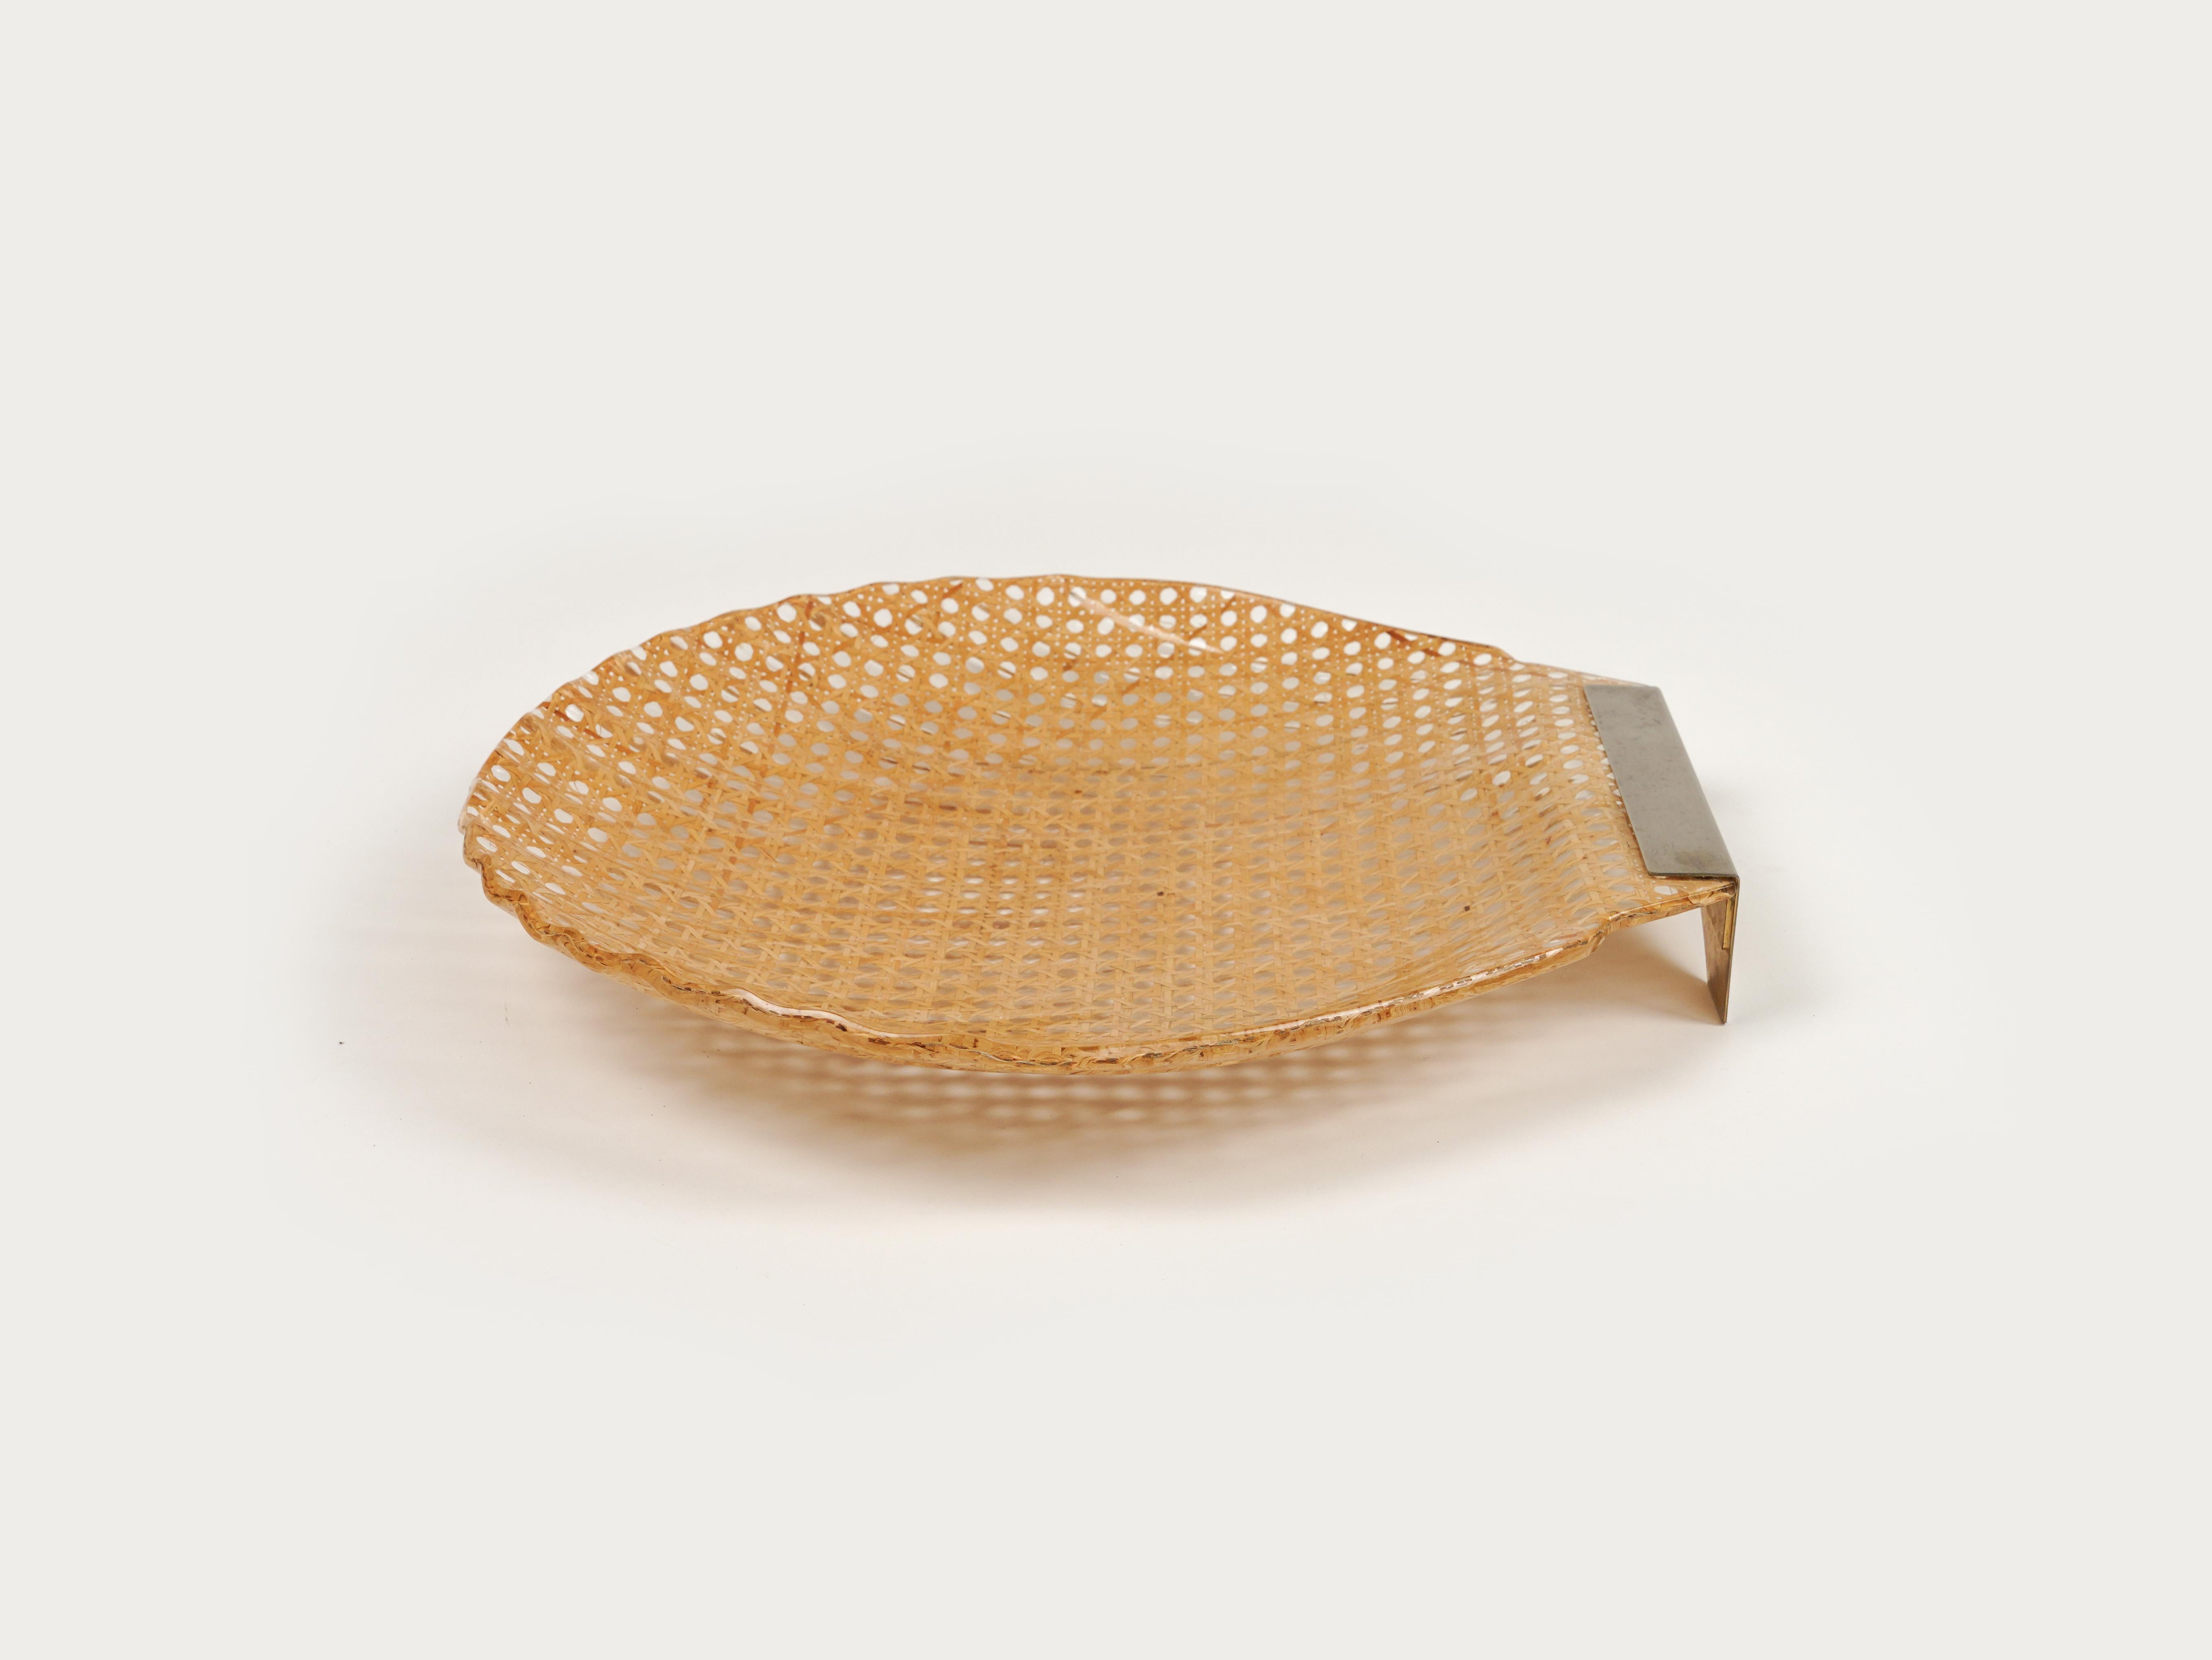 Shell Serving Tray Lucite and Rattan Christian Dior Style, France, 1970s For Sale 2